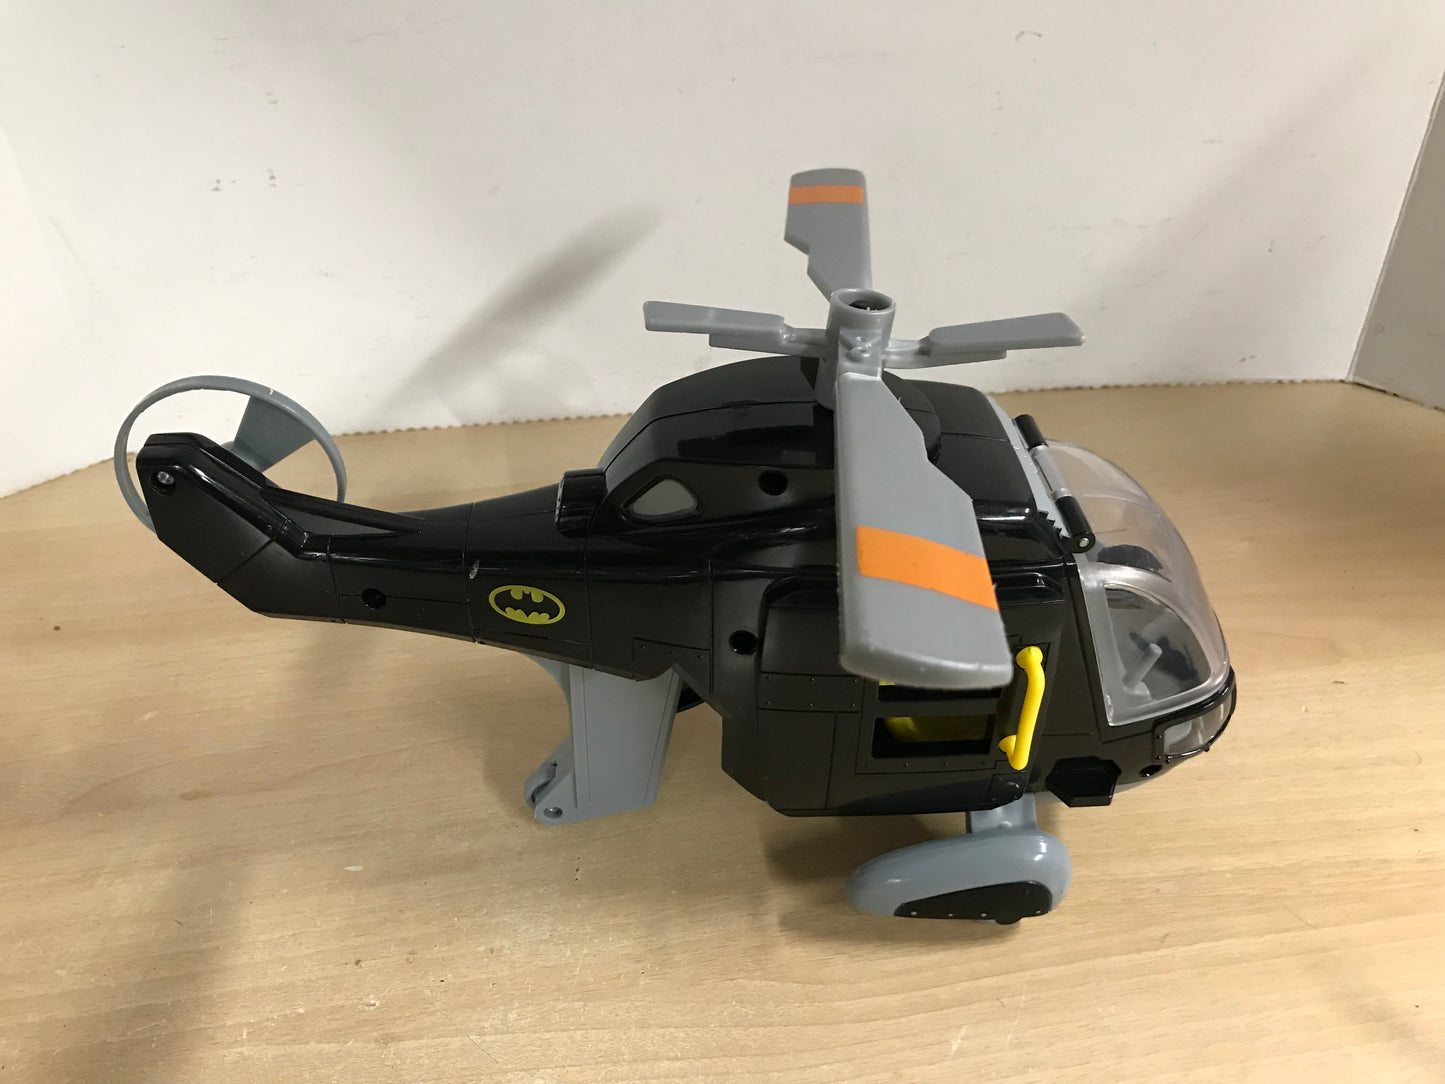 Batman Fisher Price Imaginext Gotham City Helicopter As New